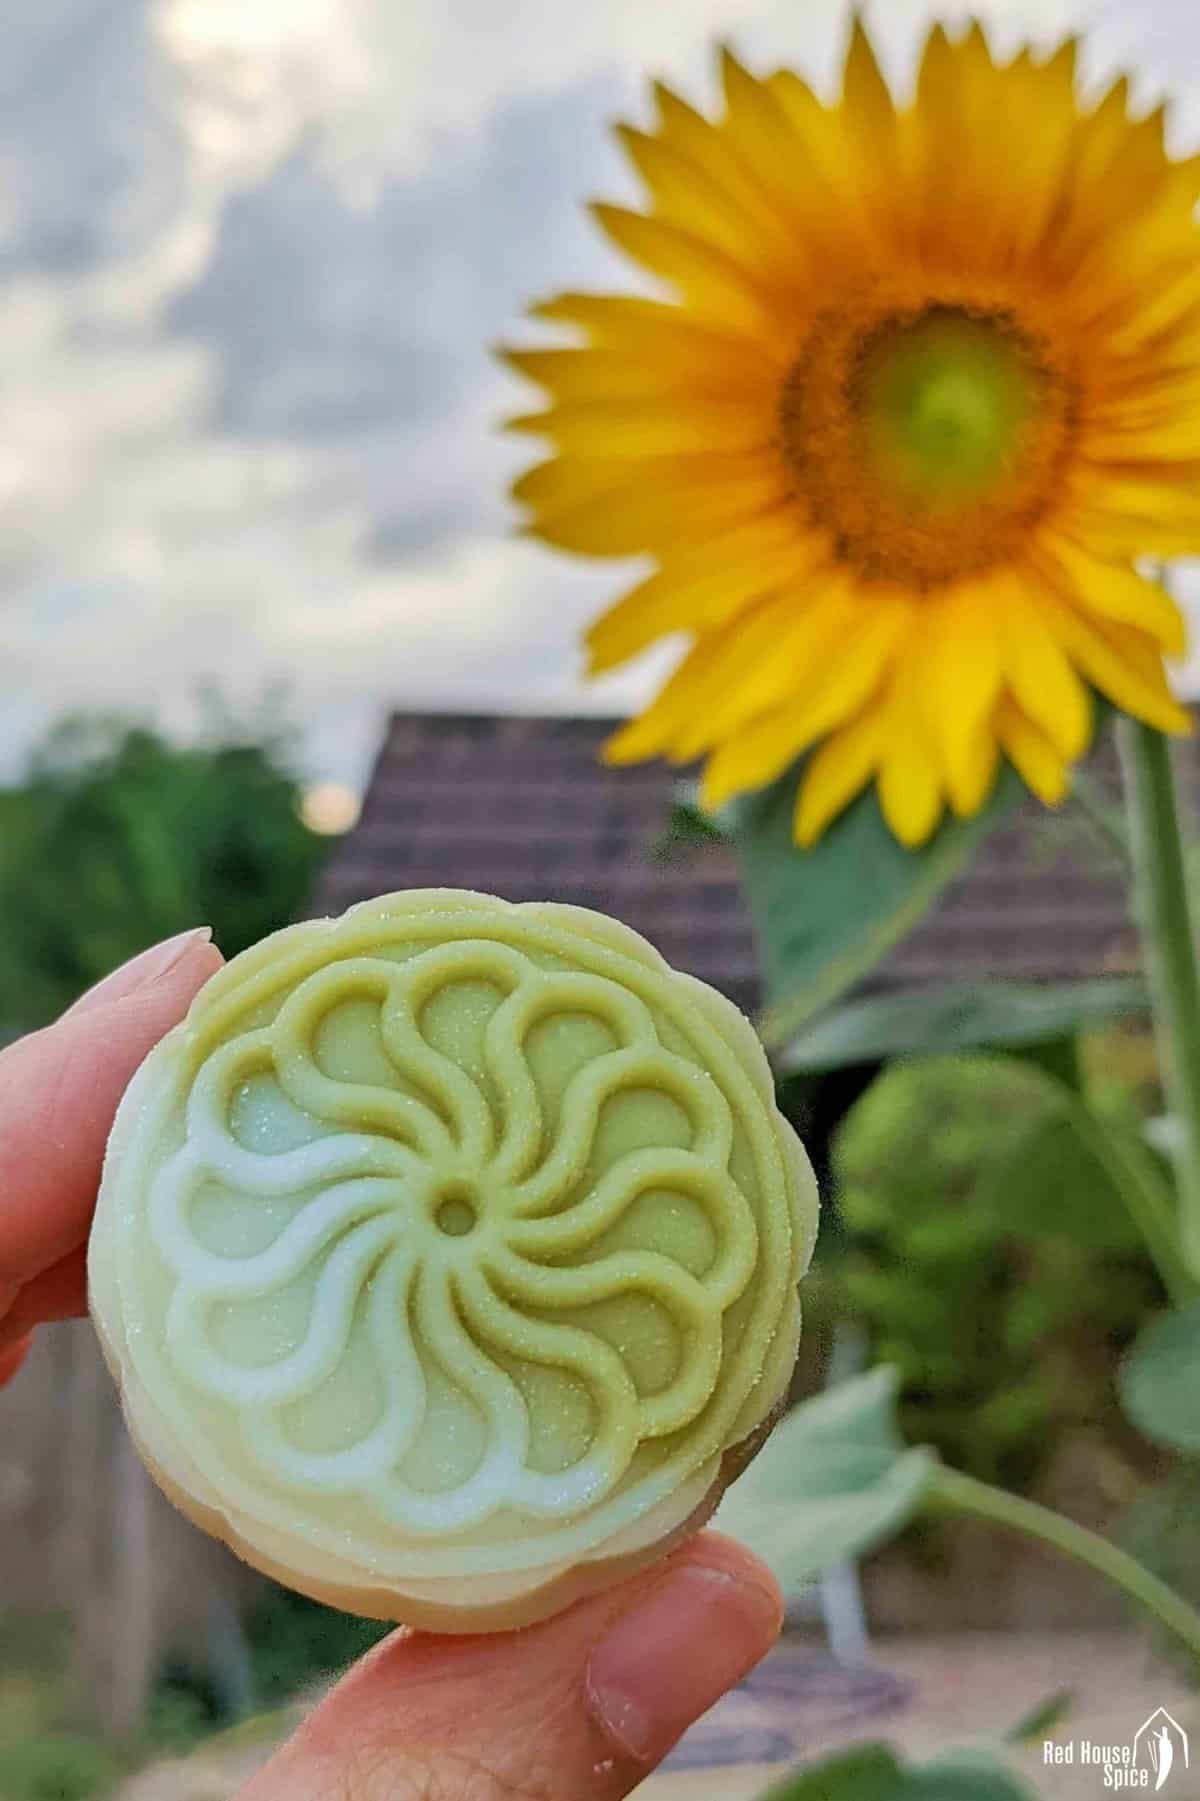 A mooncake held by hand with a sunflower in the background.